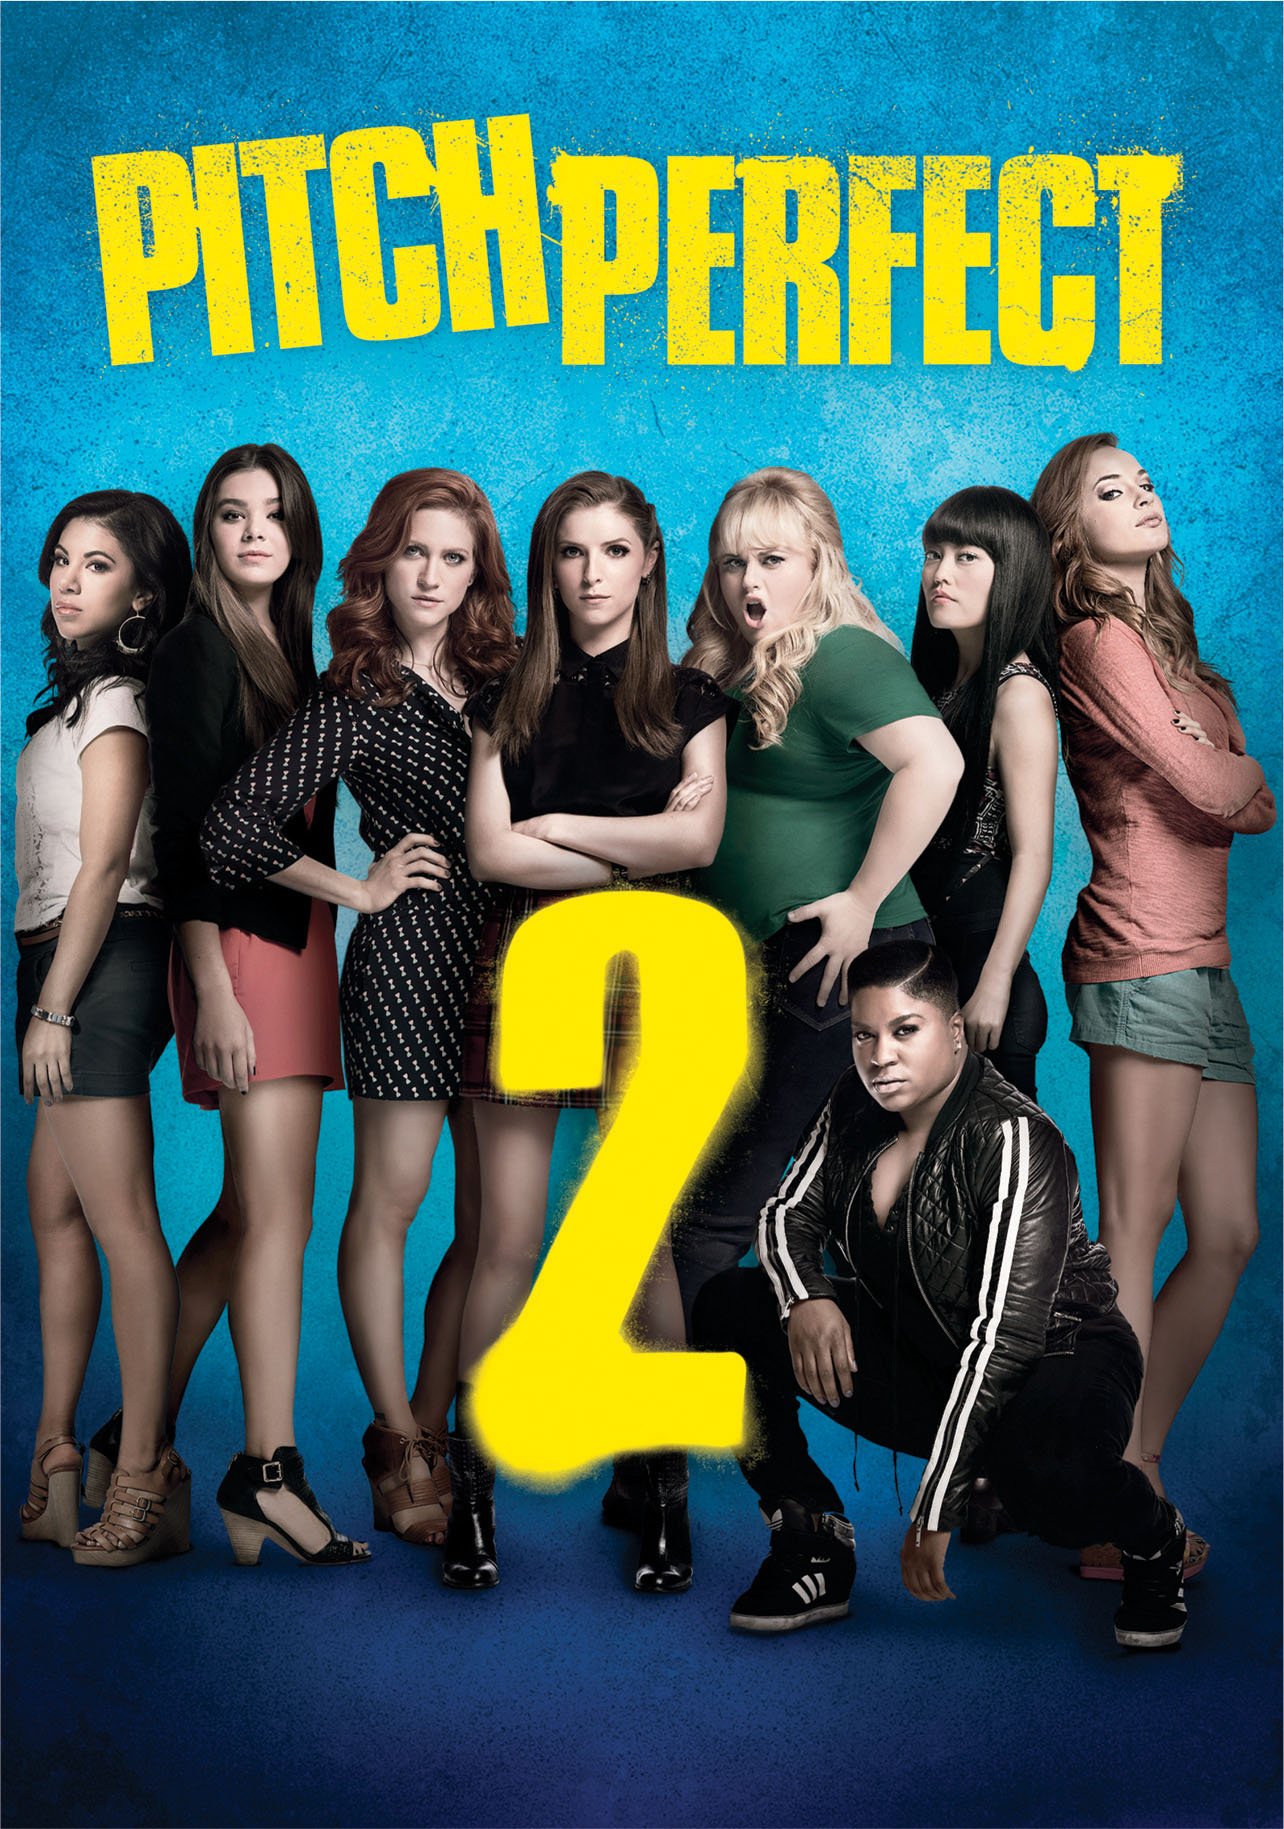 Pitch perfect dvd release date